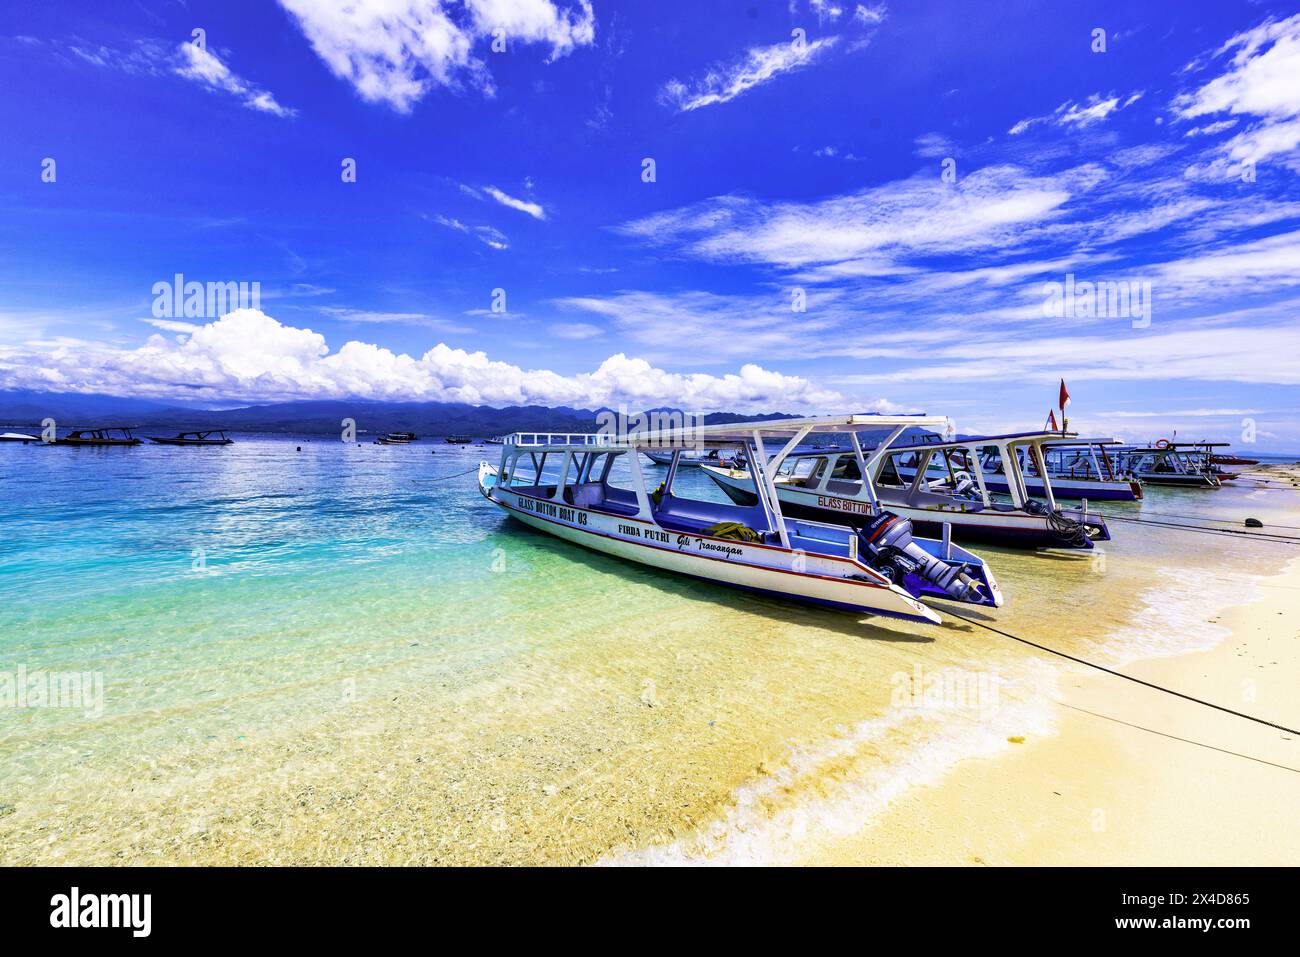 Gili Trawangan Island off the coast of Lombok, Indonesia. White sand, clear warm water with a laid back tropical atmosphere. (Editorial Use Only) Stock Photo